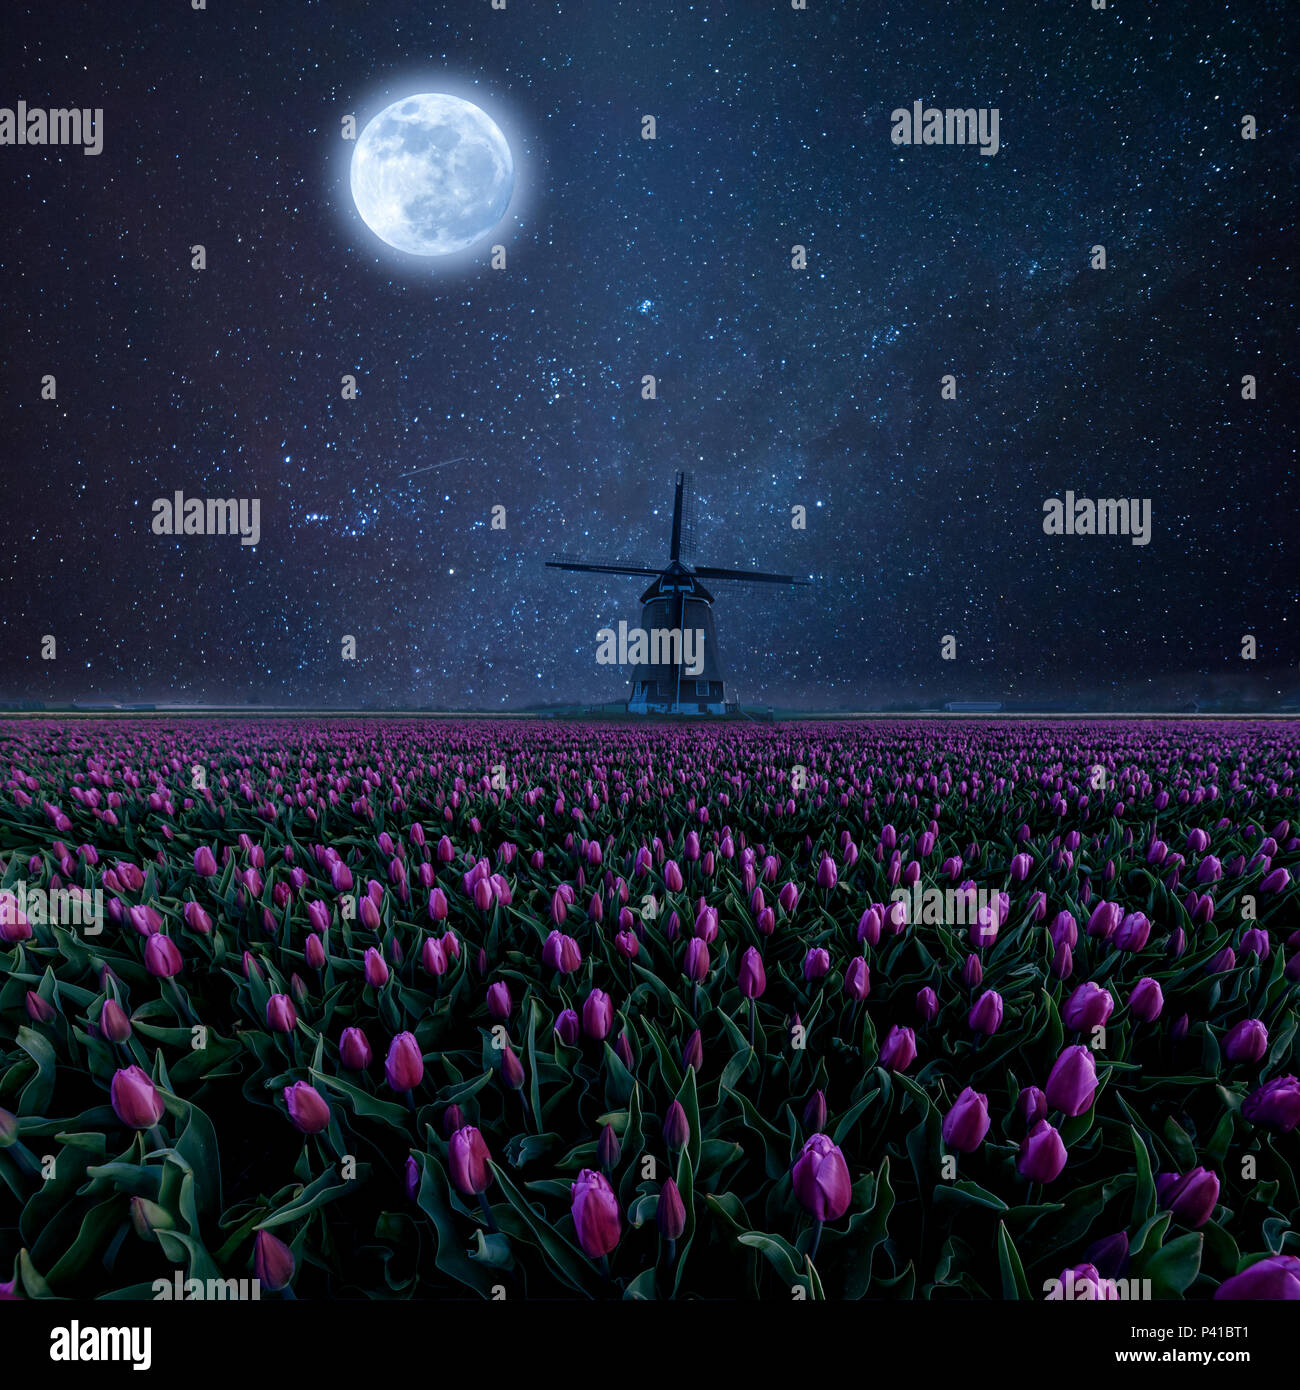 Night field of tulips and windmill. Landscape with stars, moon and flowers Stock Photo